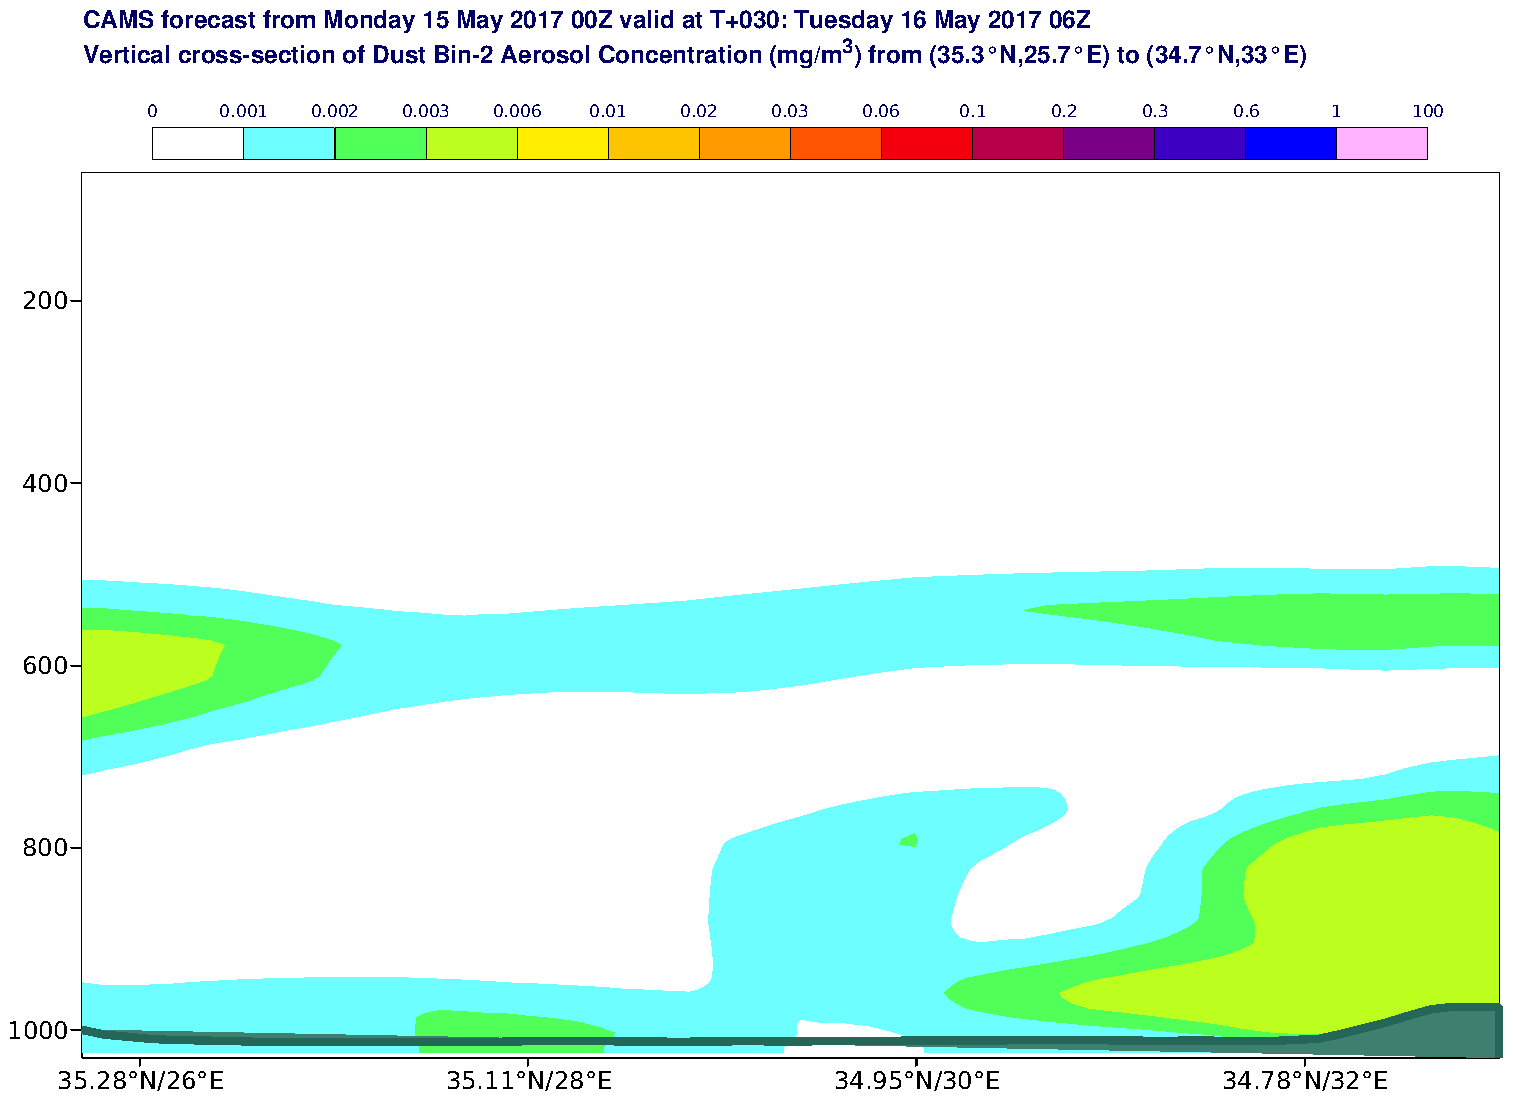 Vertical cross-section of Dust Bin-2 Aerosol Concentration (mg/m3) valid at T30 - 2017-05-16 06:00